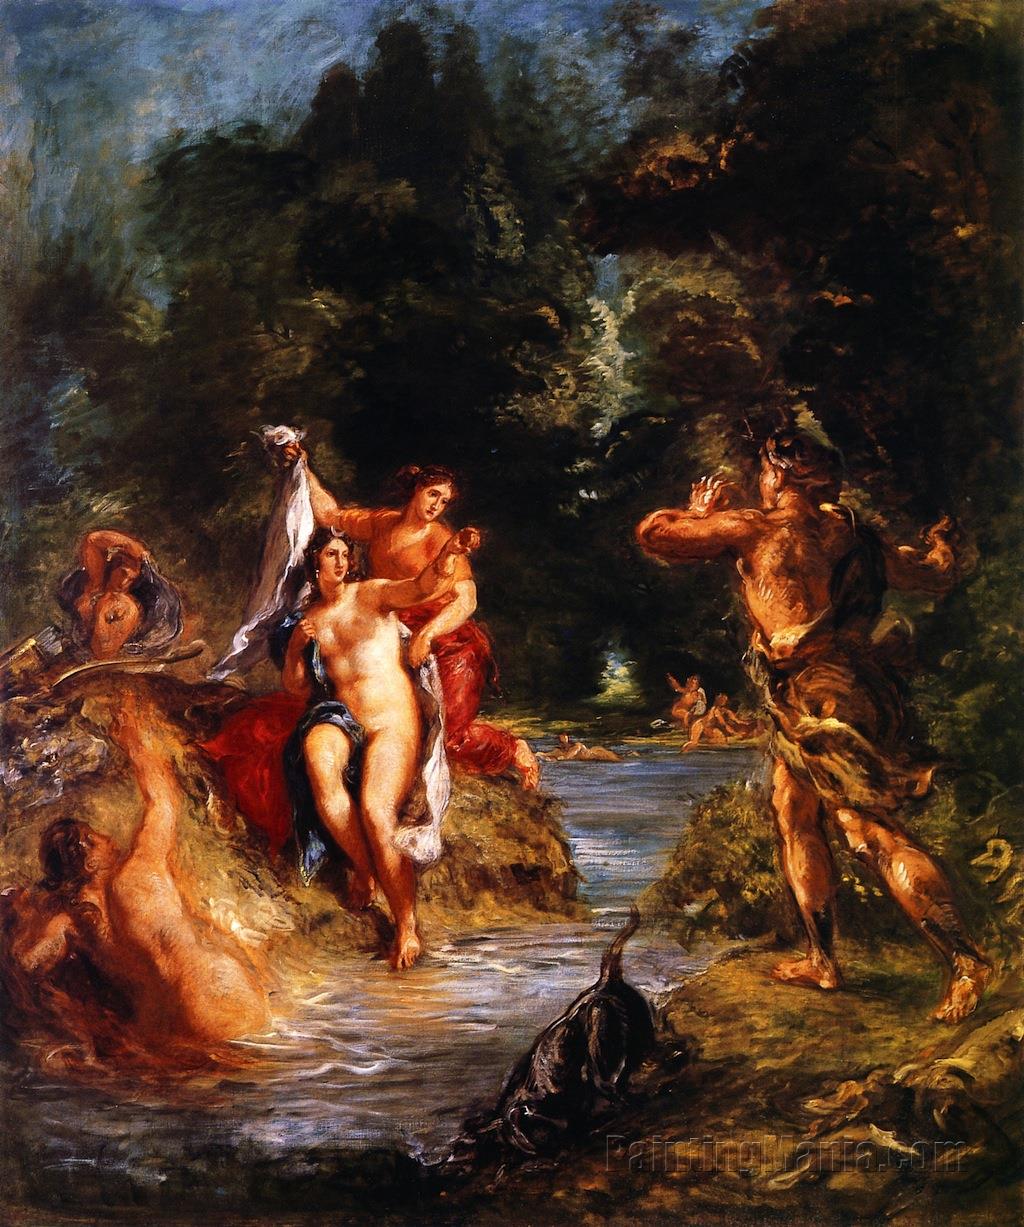 Summer - Diana and Actaeon